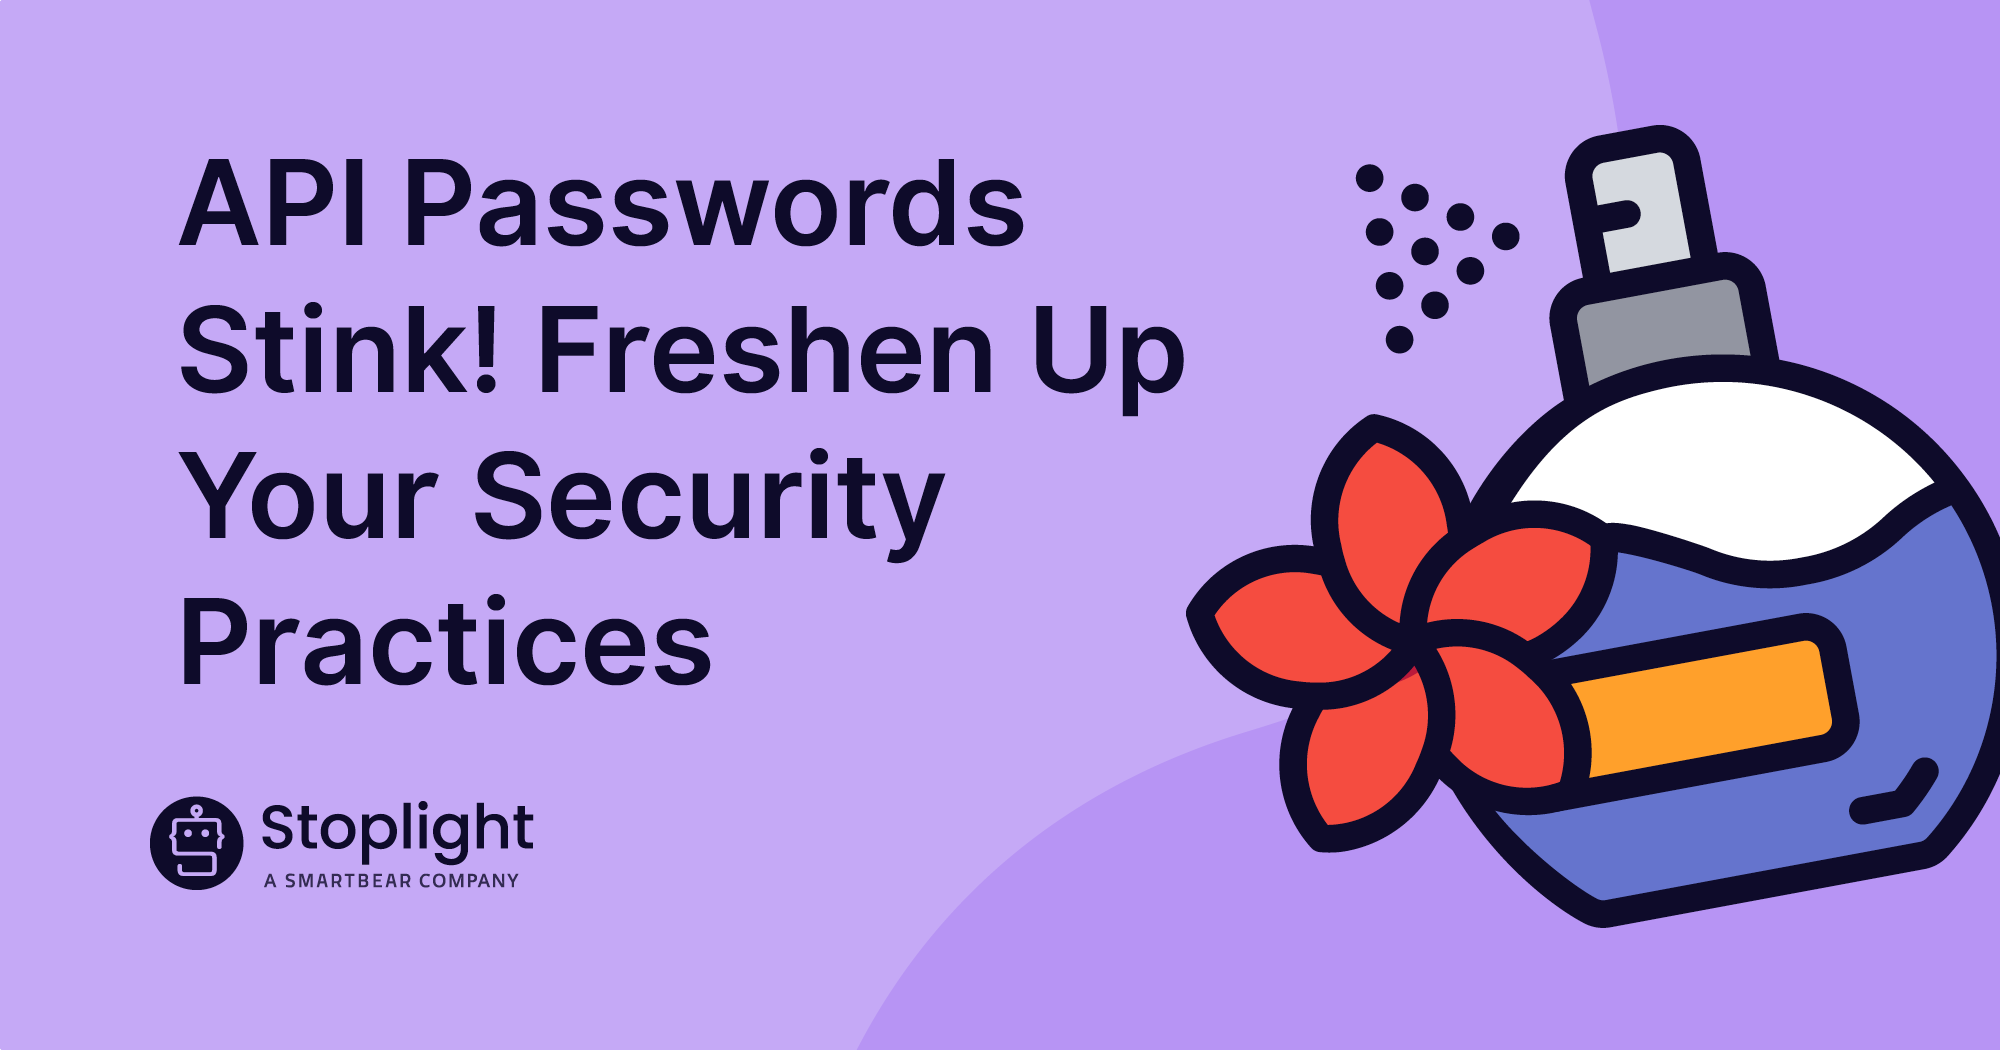 API Passwords Stink! Freshen Up Your Security Practices